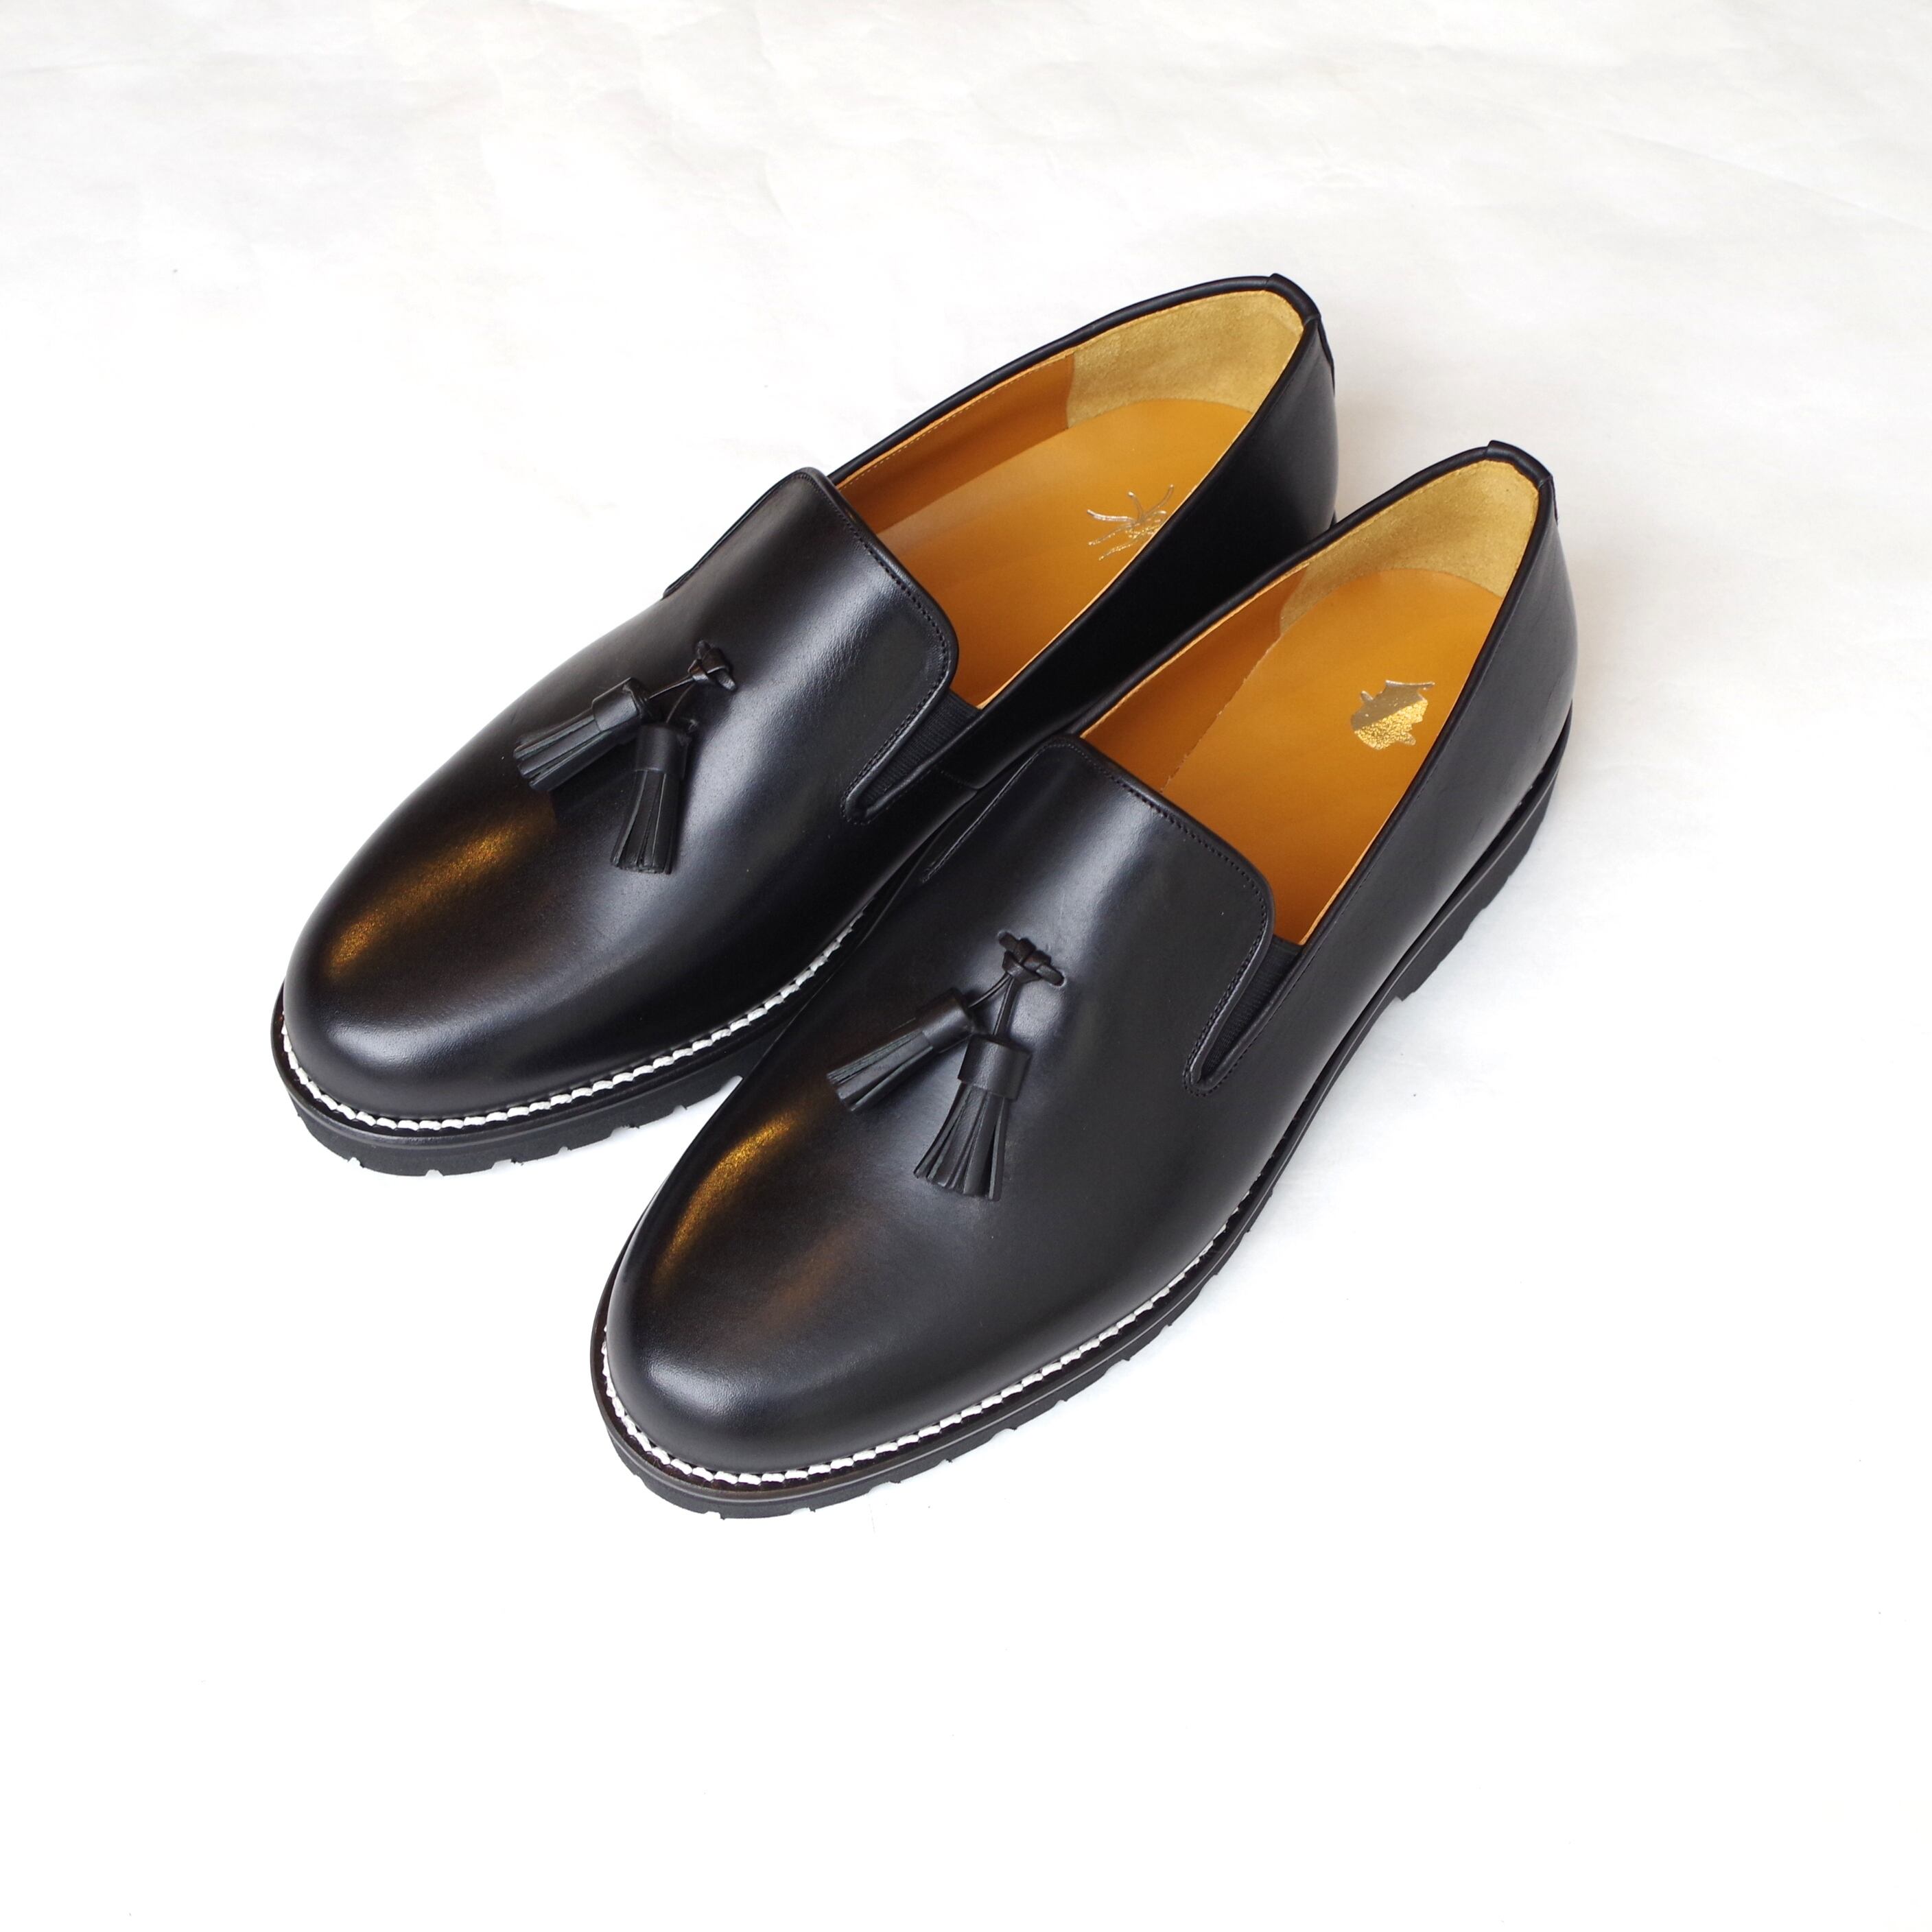 Tomo&Co. Tussel Cock Shoes   1F Store